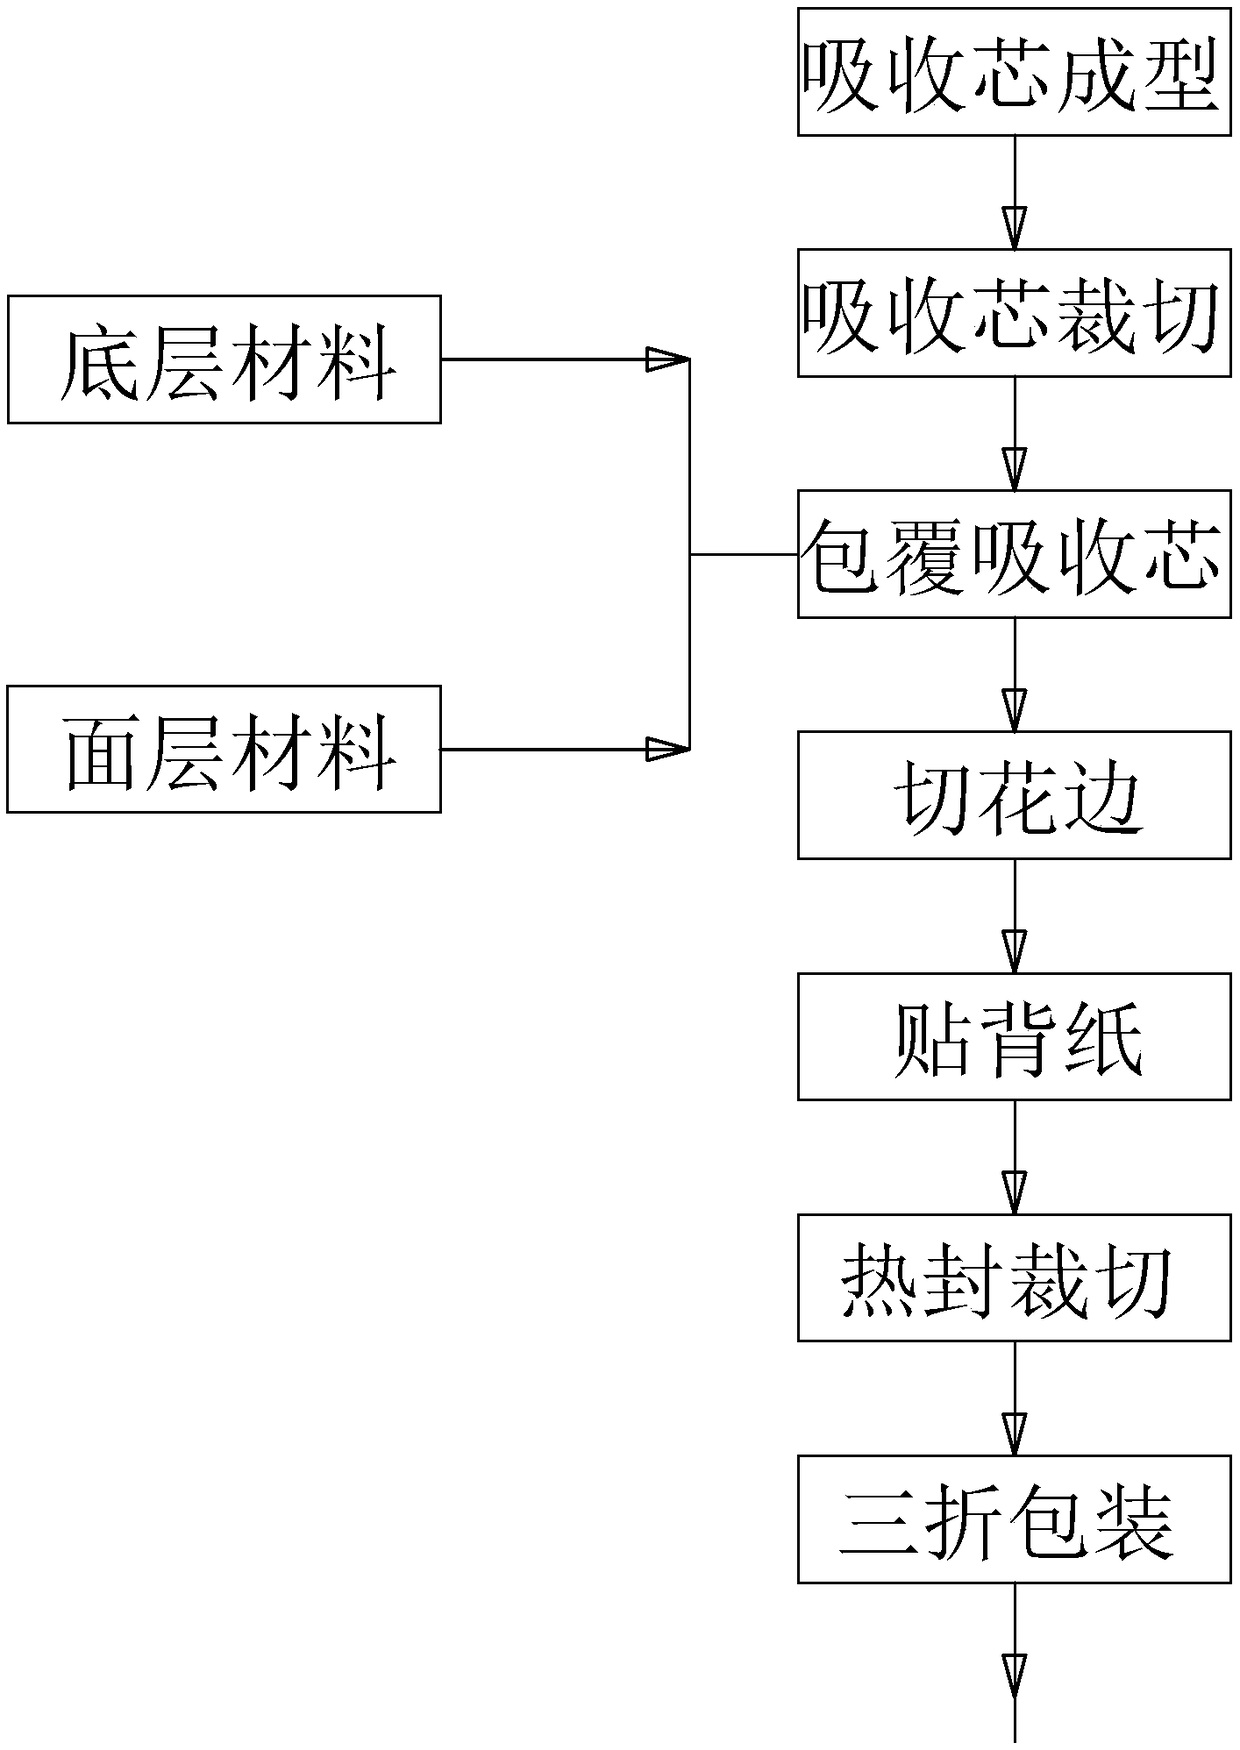 Production method and line for female hygiene care products